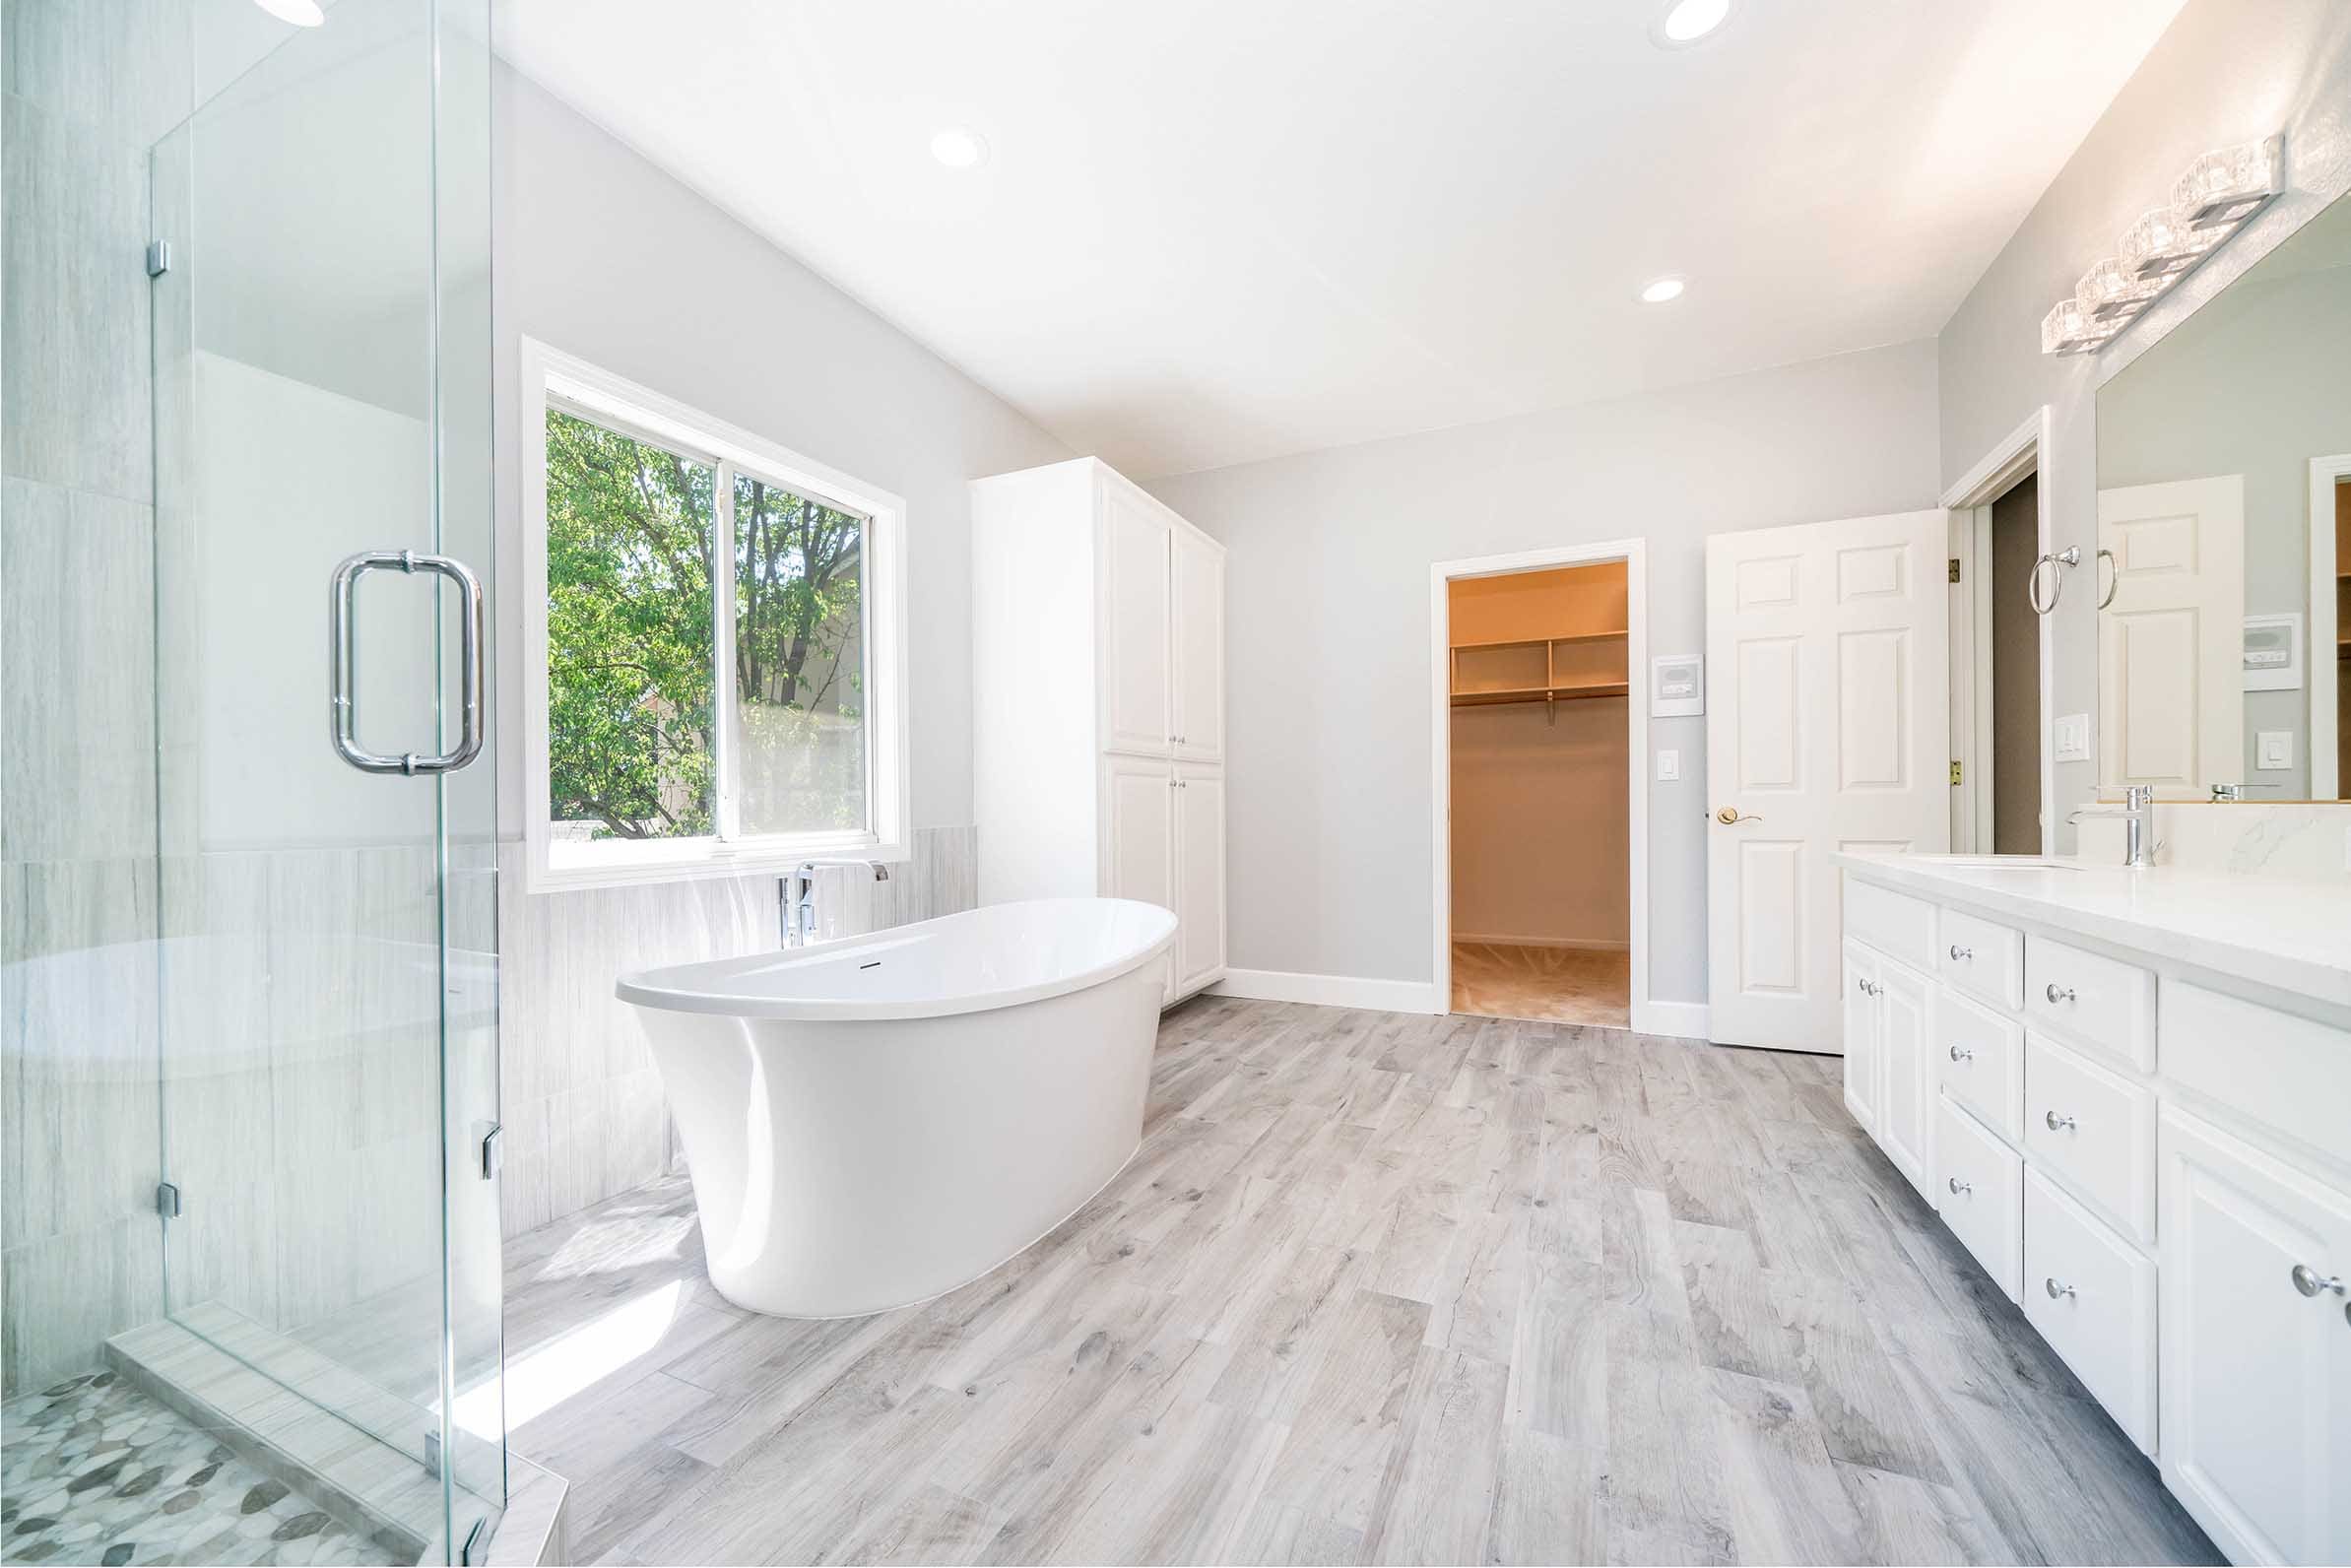 Bathroom Remodel by Luxehome Construction Inc in Sacramento, CA 95831